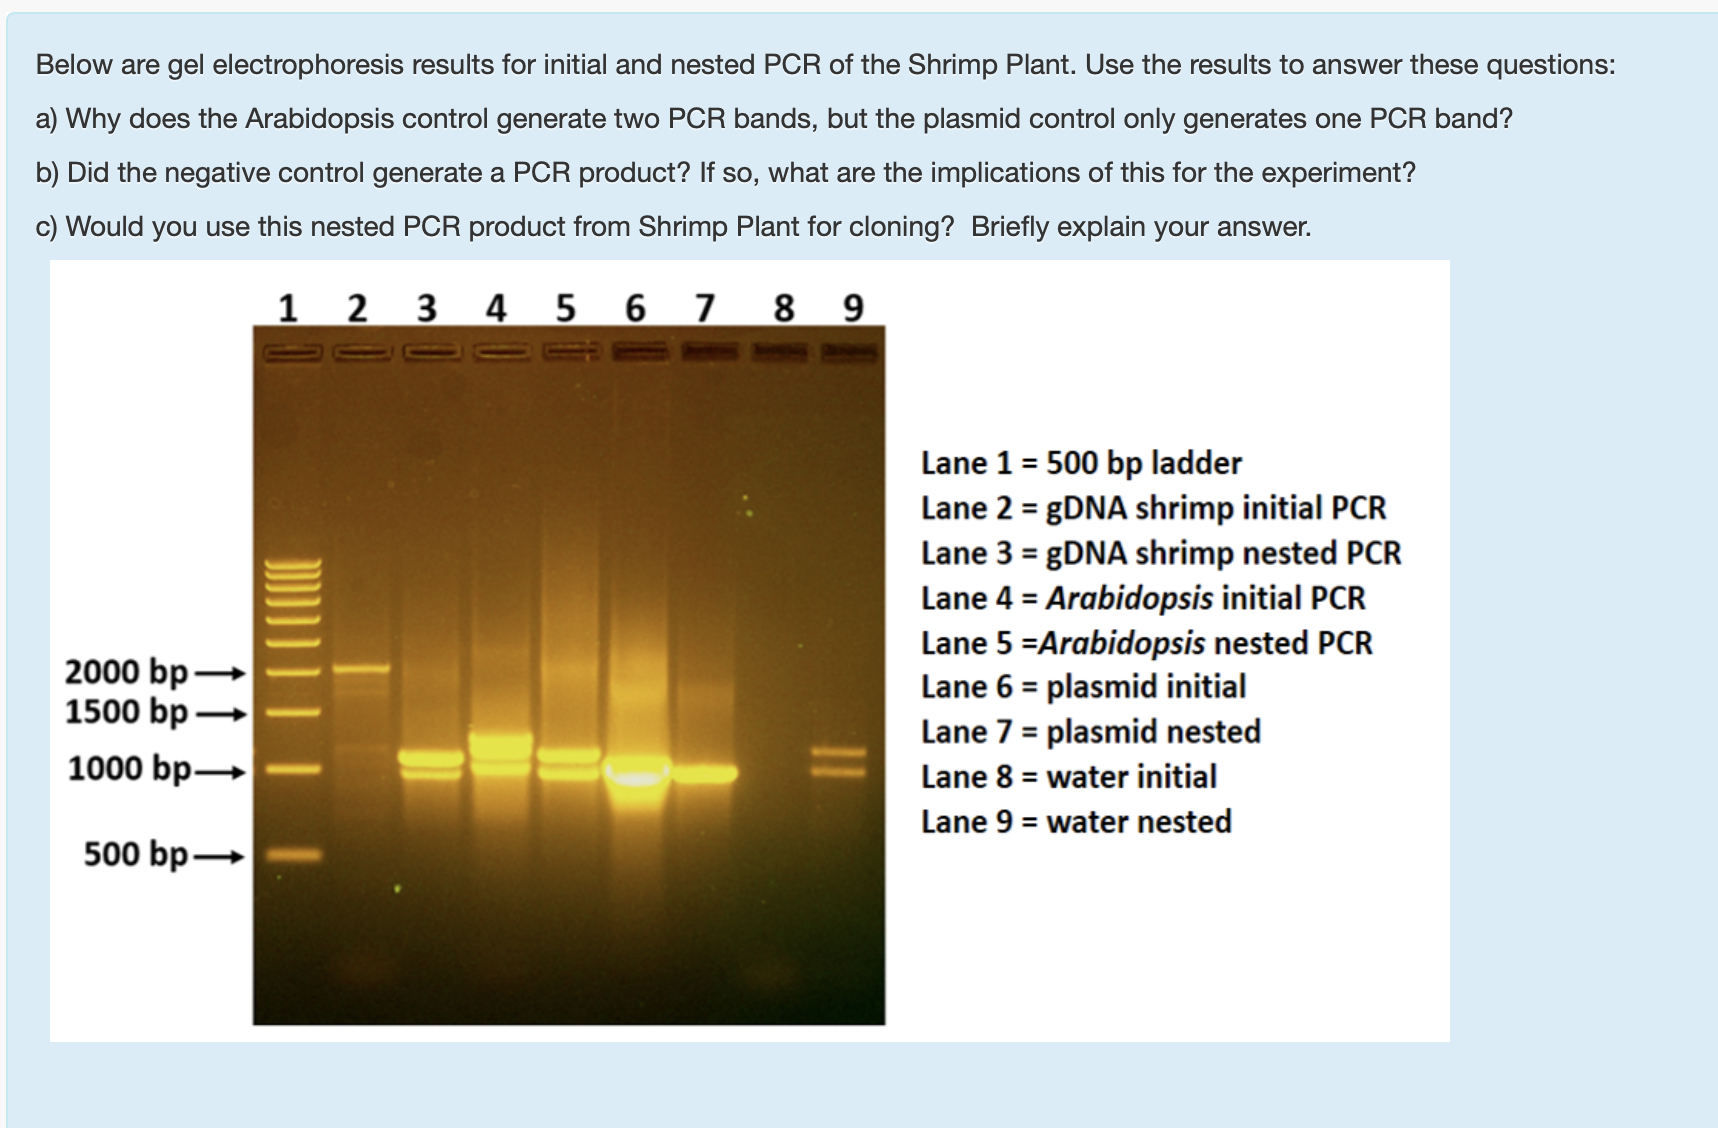 Below are gel electrophoresis results for initial and nested PCR of the Shrimp Plant. Use the results to answer these questions:
a) Why does the Arabidopsis control generate two PCR bands, but the plasmid control only generates one PCR band?
b) Did the negative control generate a PCR product? If so, what are the implications of this for the experiment?
c) Would you use this nested PCR product from Shrimp Plant for cloning? Briefly explain your answer.
3
4
6.
7.
8 9
Lane 1 = 500 bp ladder
Lane 2 = 8DNA shrimp initial PCR
Lane 3 = 9DNA shrimp nested PCR
Lane 4 = Arabidopsis initial PCR
Lane 5 =Arabidopsis nested PCR
Lane 6 = plasmid initial
Lane 7 = plasmid nested
%3D
2000 bp -
1500 bp -
1000 bp-
Lane 8 = water initial
Lane 9 = water nested
500 bp-
